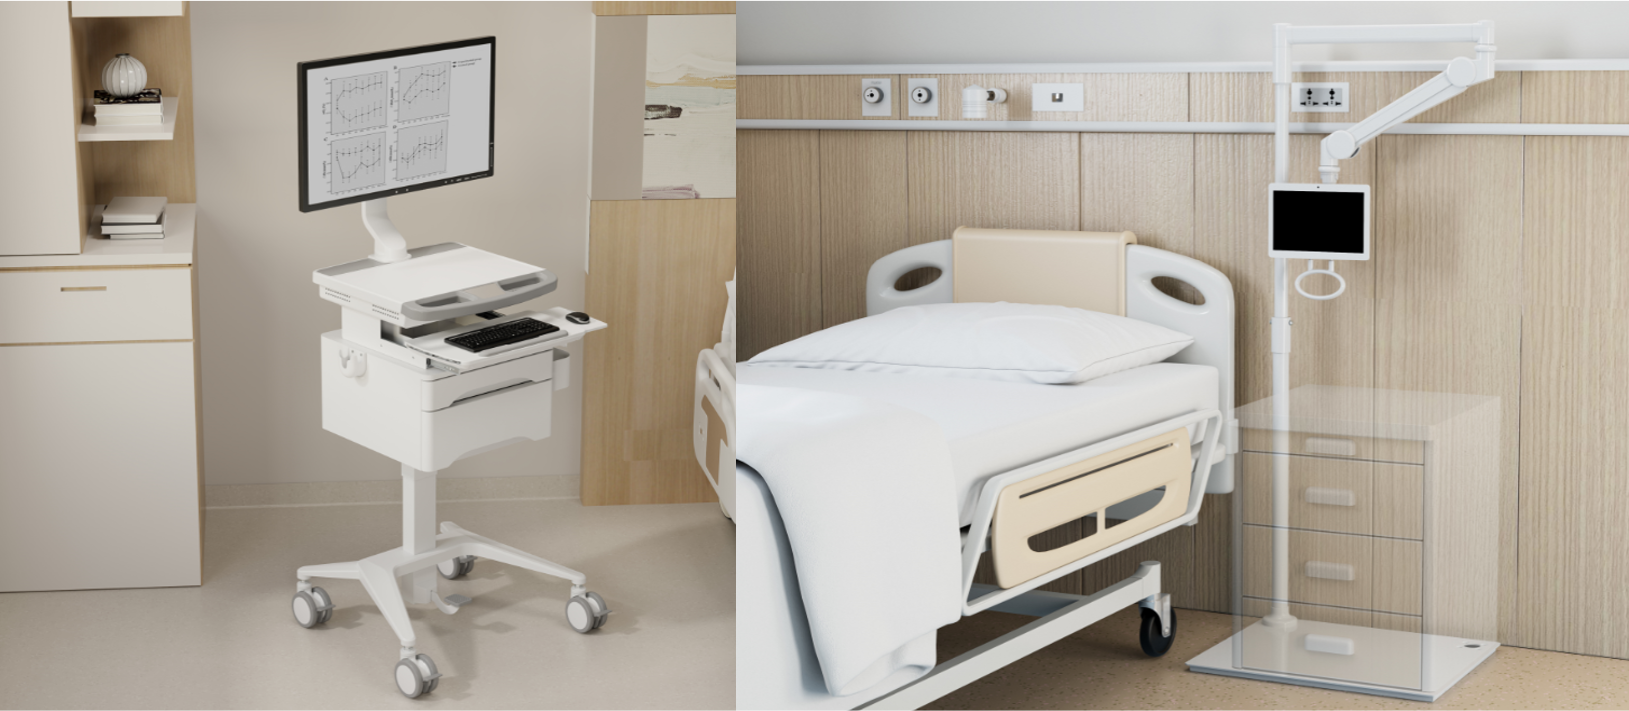 Floor Stand and Cart for Healthcare Equipment